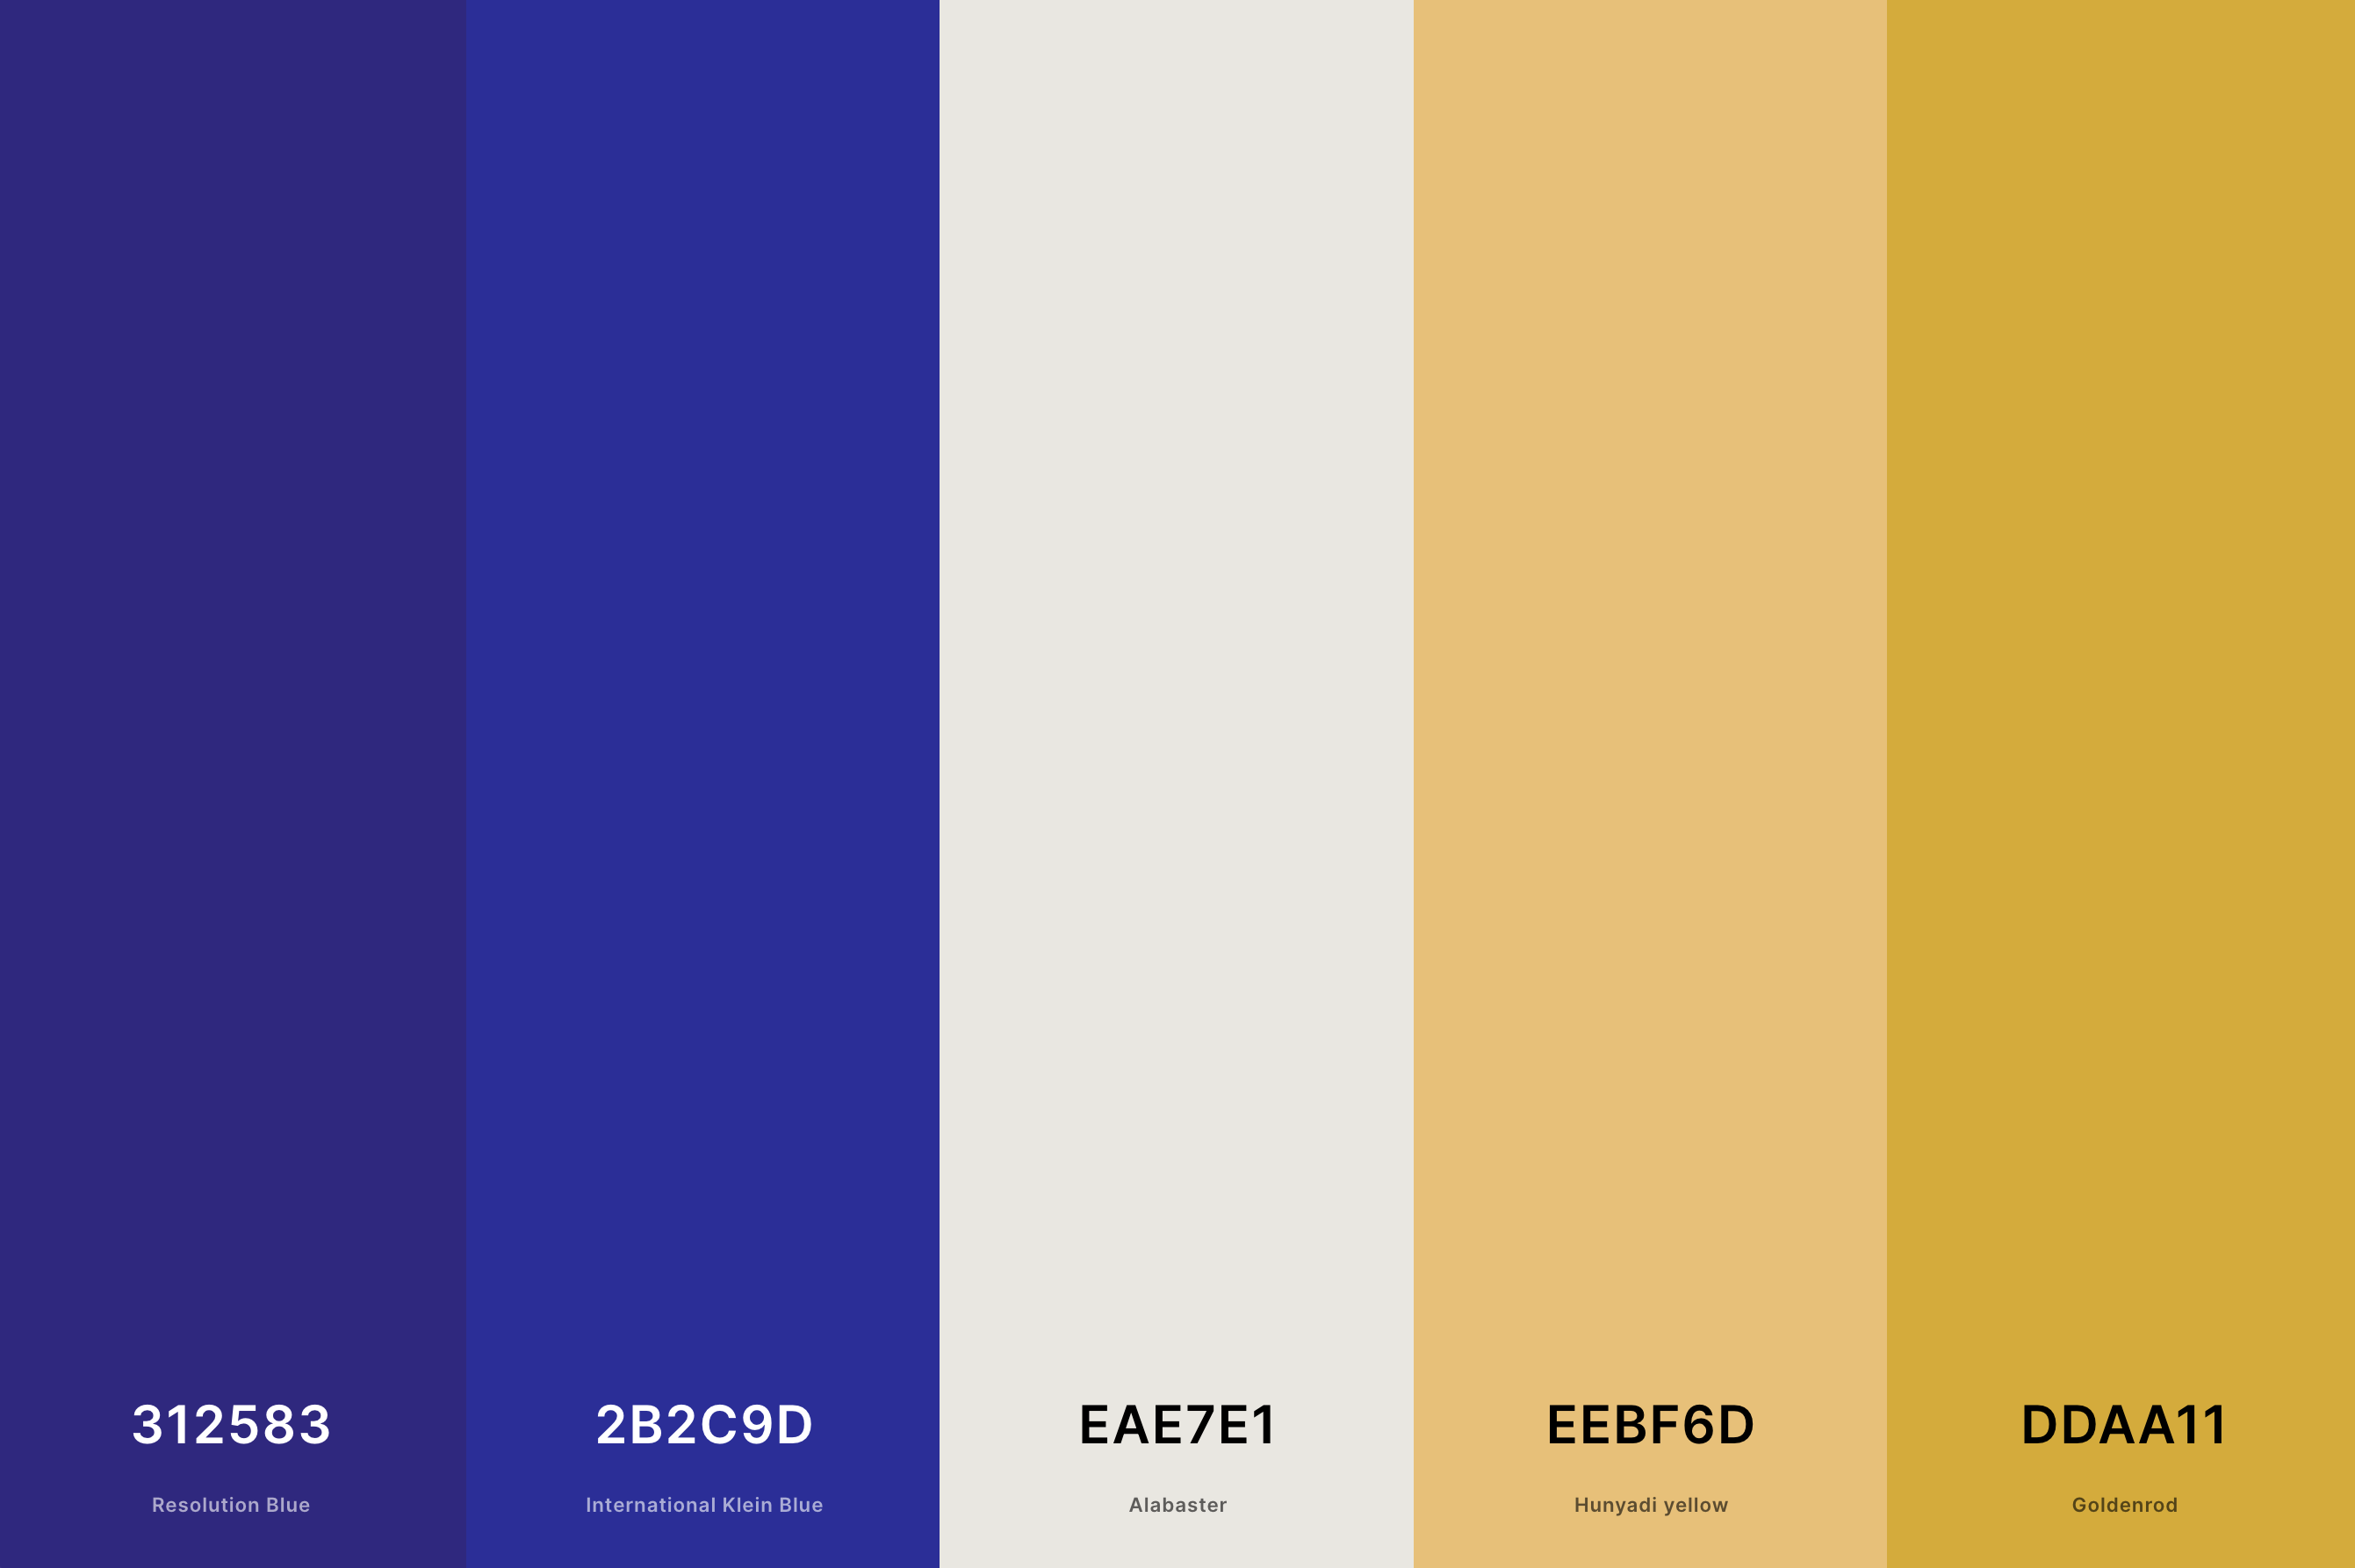 2. Indigo And Honeycomb Color Palette Color Palette with Resolution Blue (Hex #312583) + International Klein Blue (Hex #2B2C9D) + Alabaster (Hex #EAE7E1) + Hunyadi Yellow (Hex #EEBF6D) + Goldenrod (Hex #DDAA11) Color Palette with Hex Codes